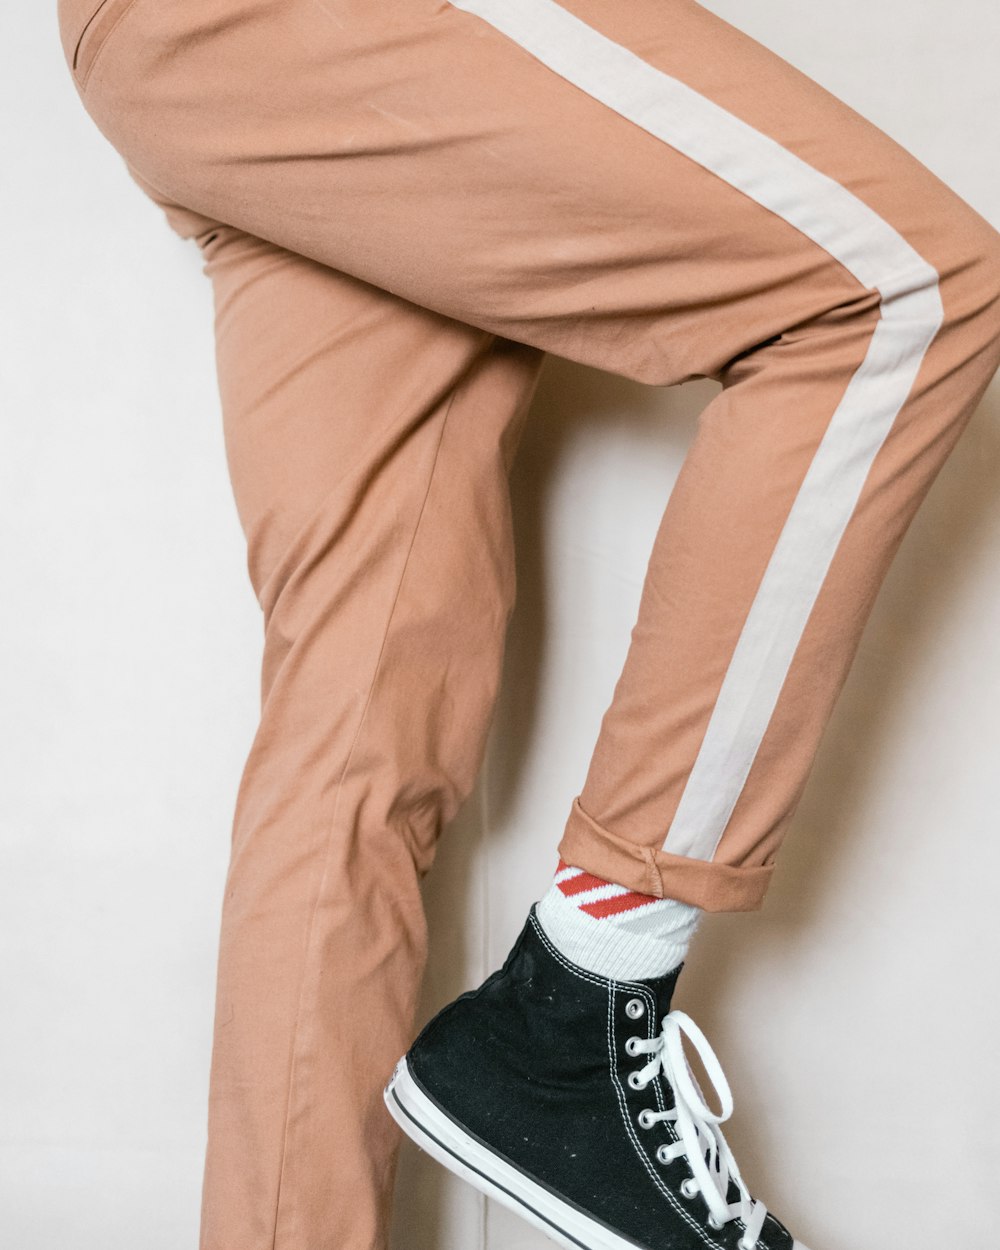 person in brown pants and black and white nike sneakers